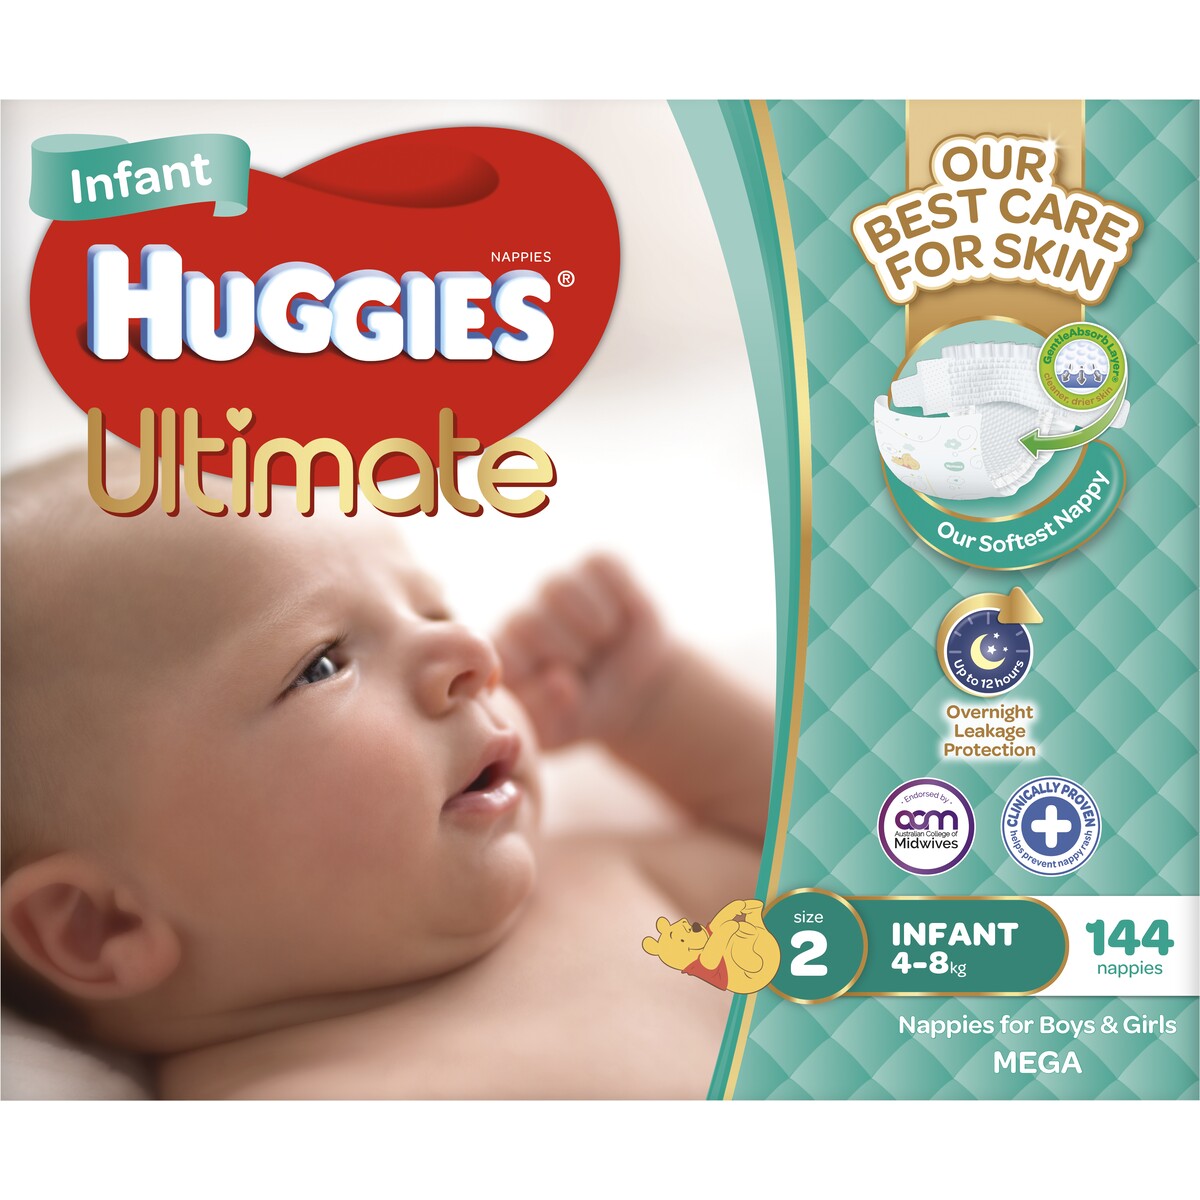 Nappies (Any Size)